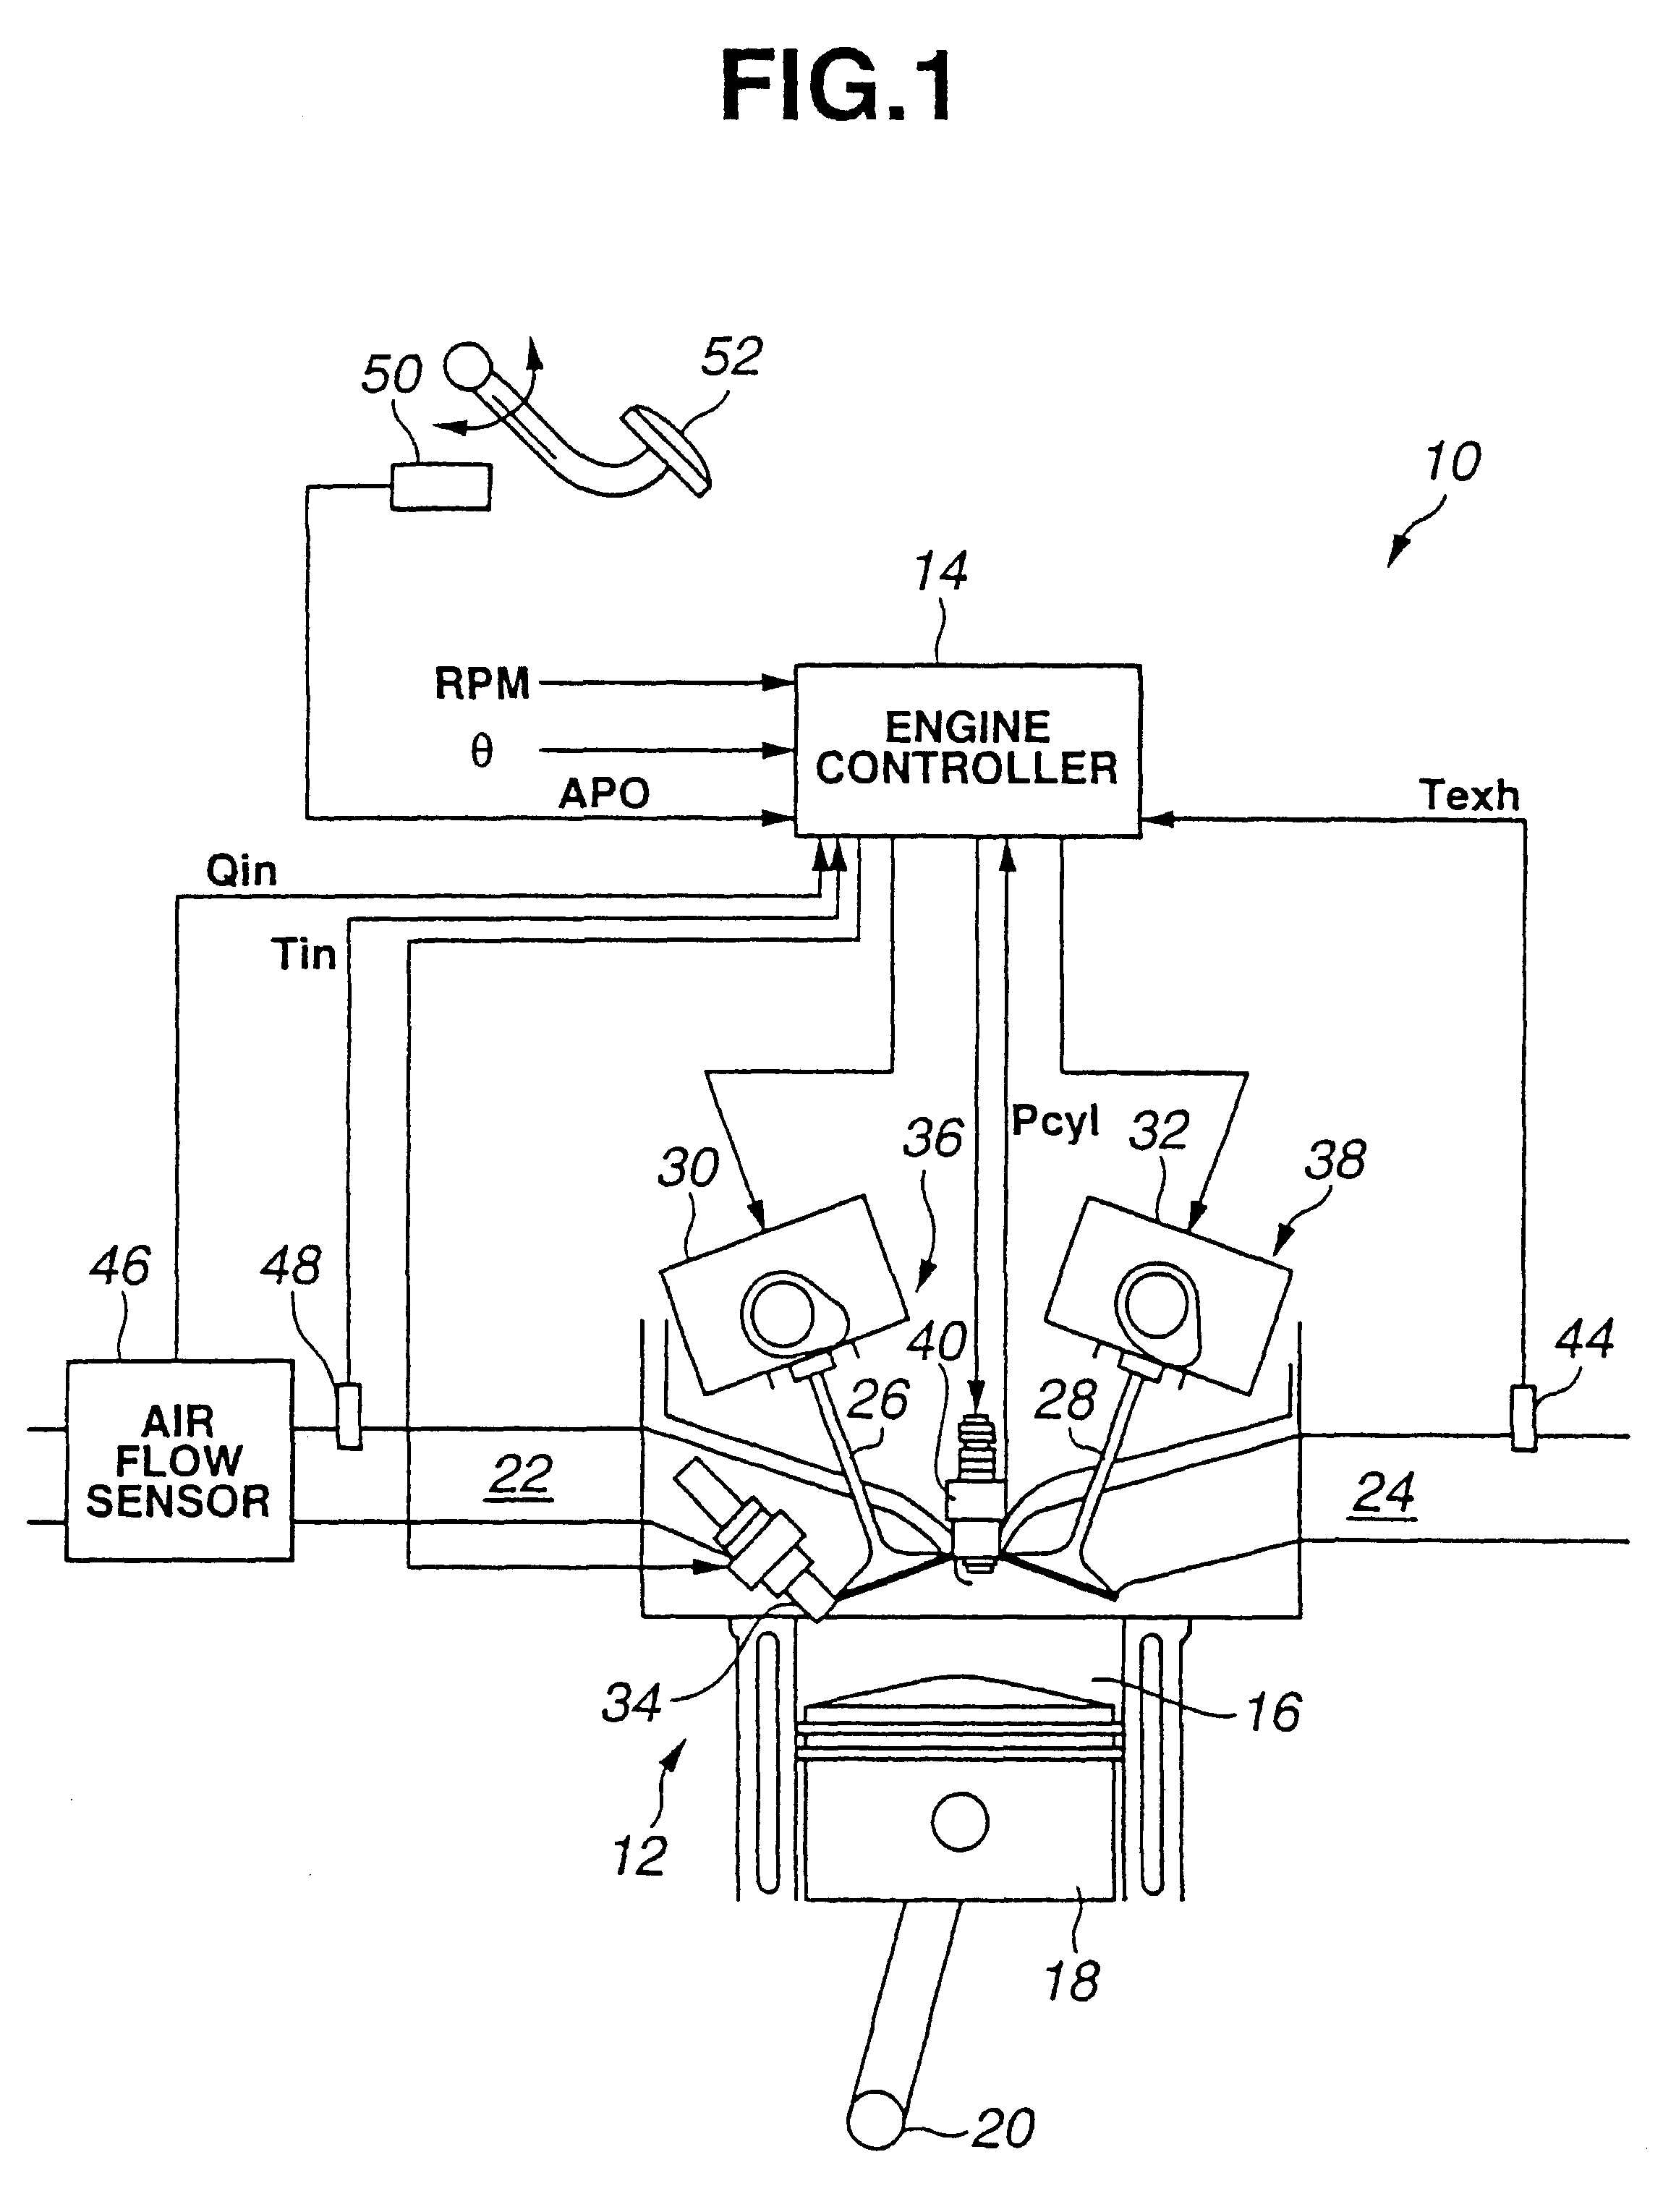 Auto-ignition of gasoline engine by varying exhaust gas retaining duration